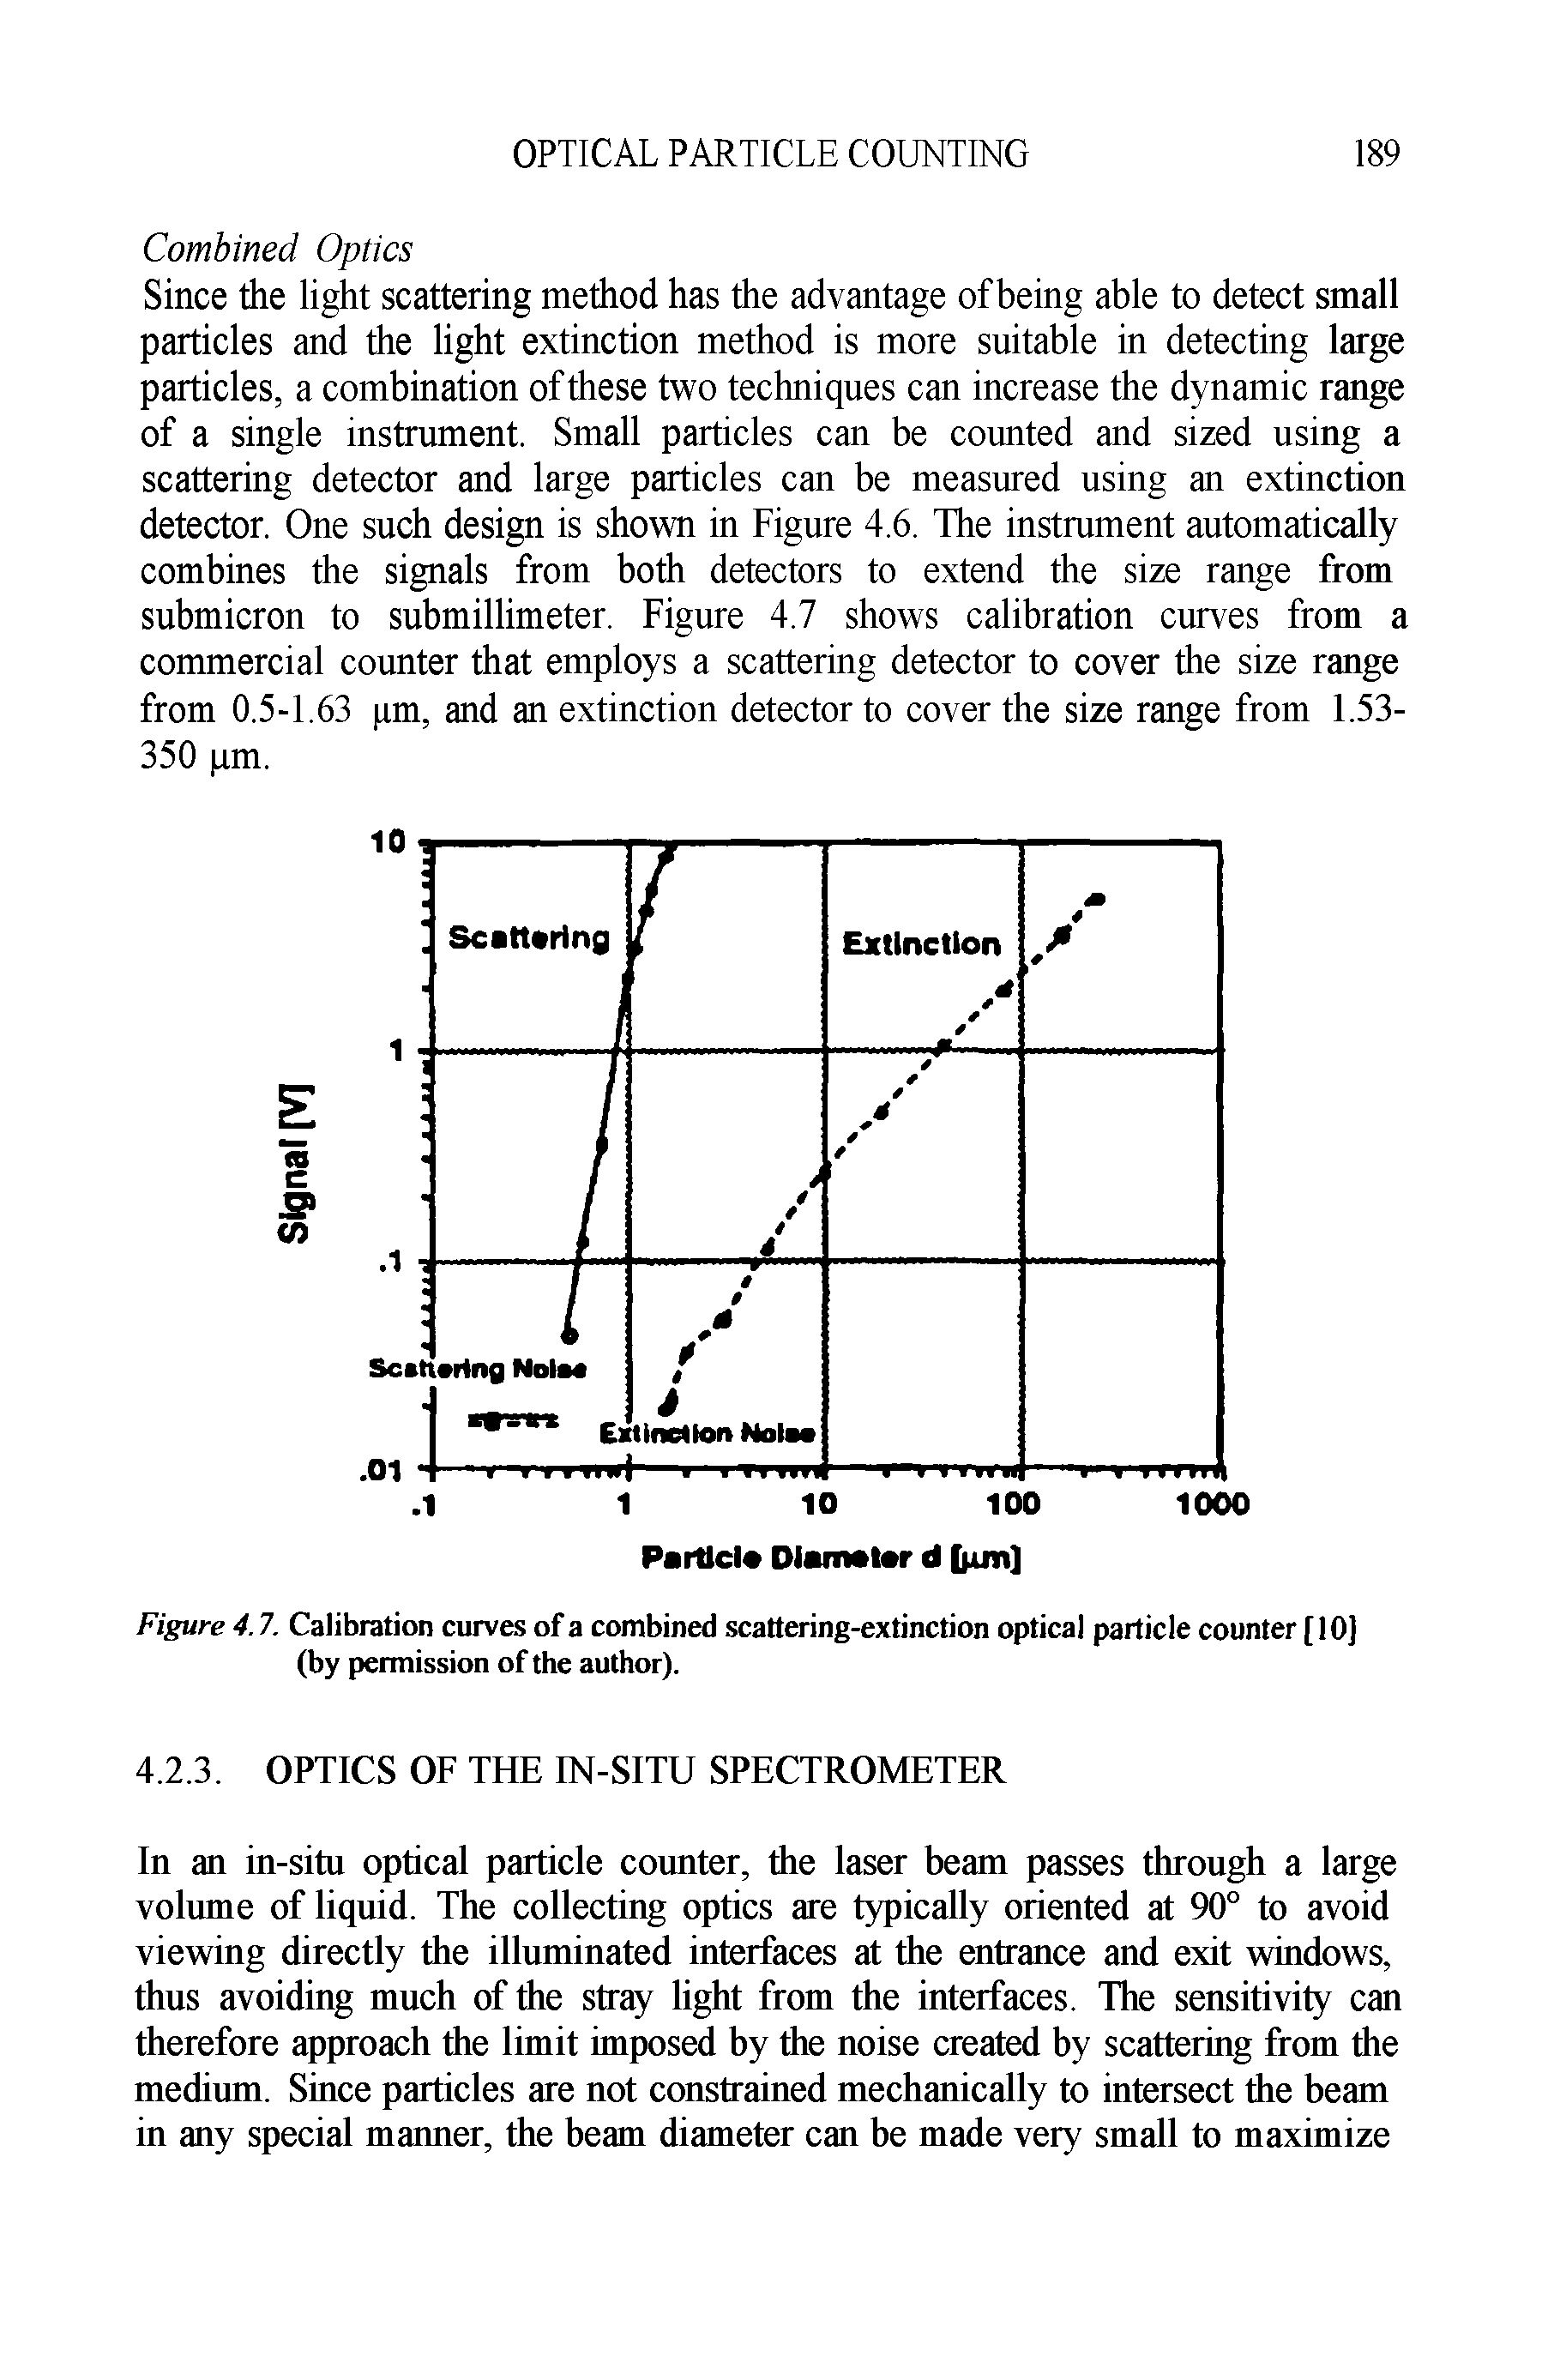 Figure 4.7. Calibration curves of a combined scattering-extinction optical particle counter [ 10] (by permission of the author).